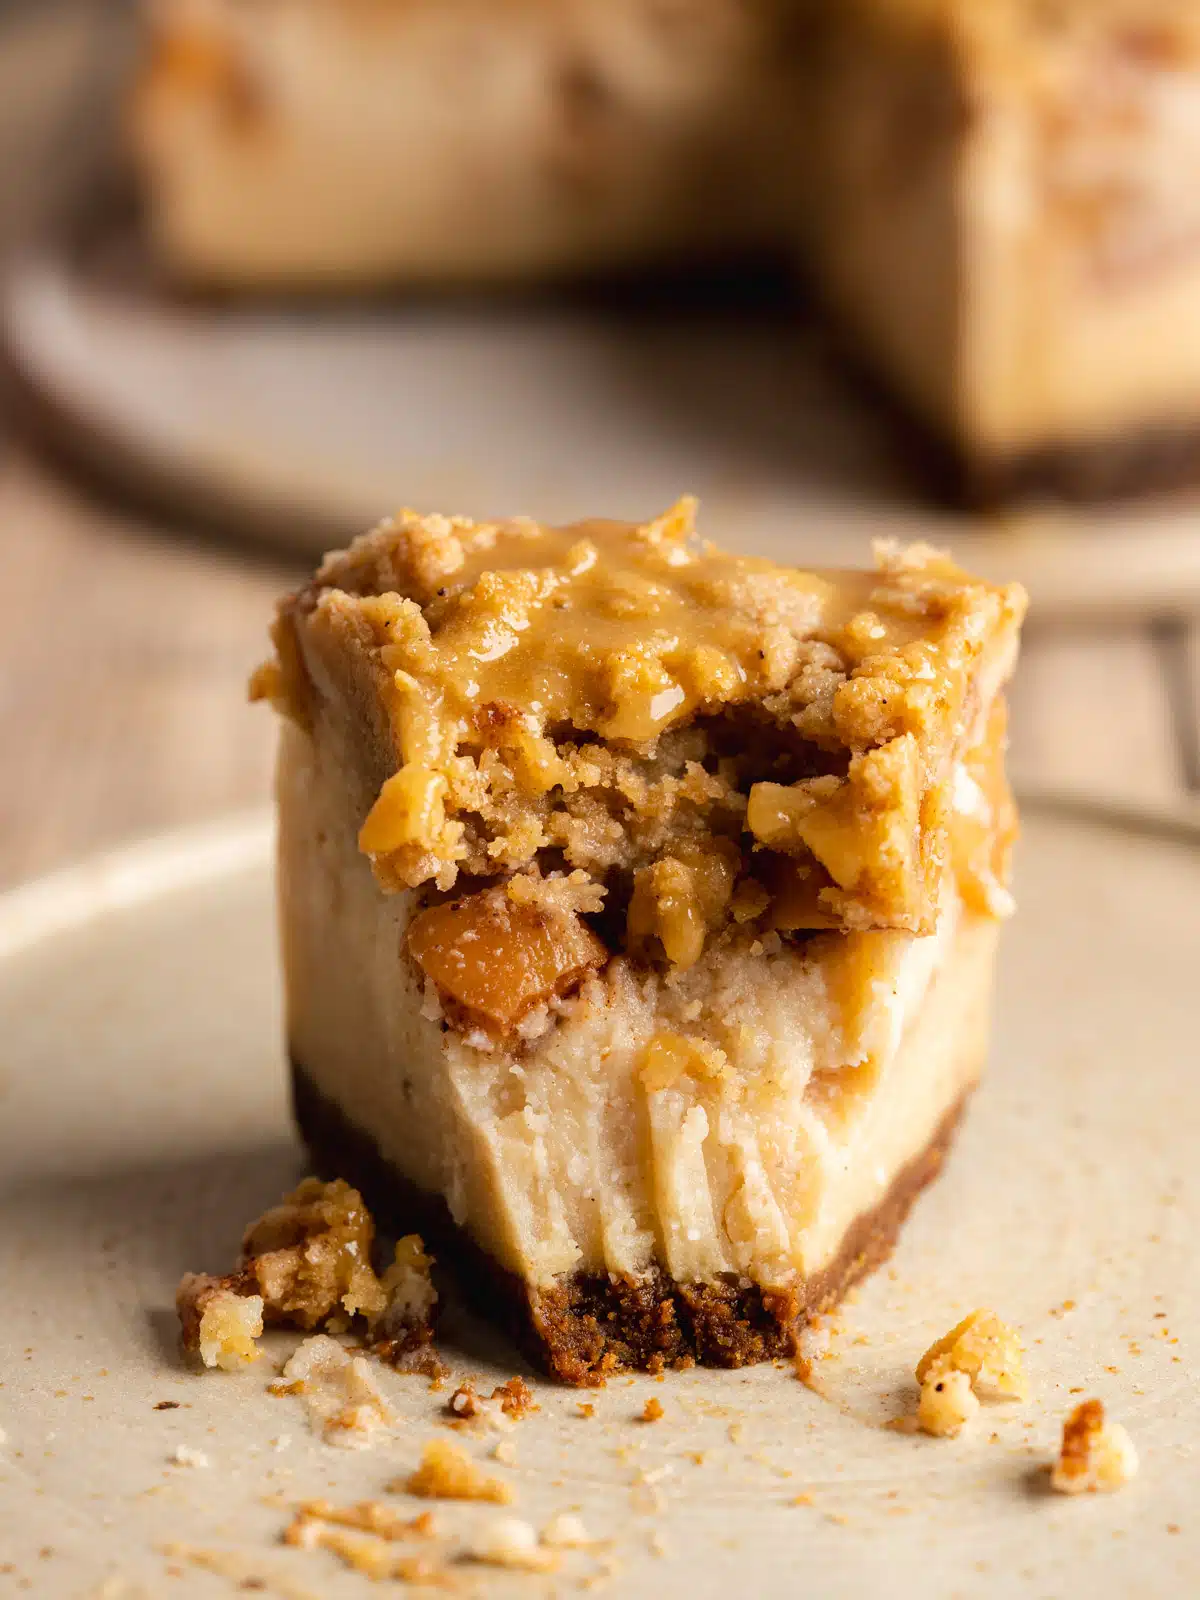 Slice of apple crumble cheesecake on a plate with the pointy end facing the camera and a bite taken out to show the 4 distinct layers of biscoff crust, creamy cheesecake filling, spiced apples, and crumb topping.